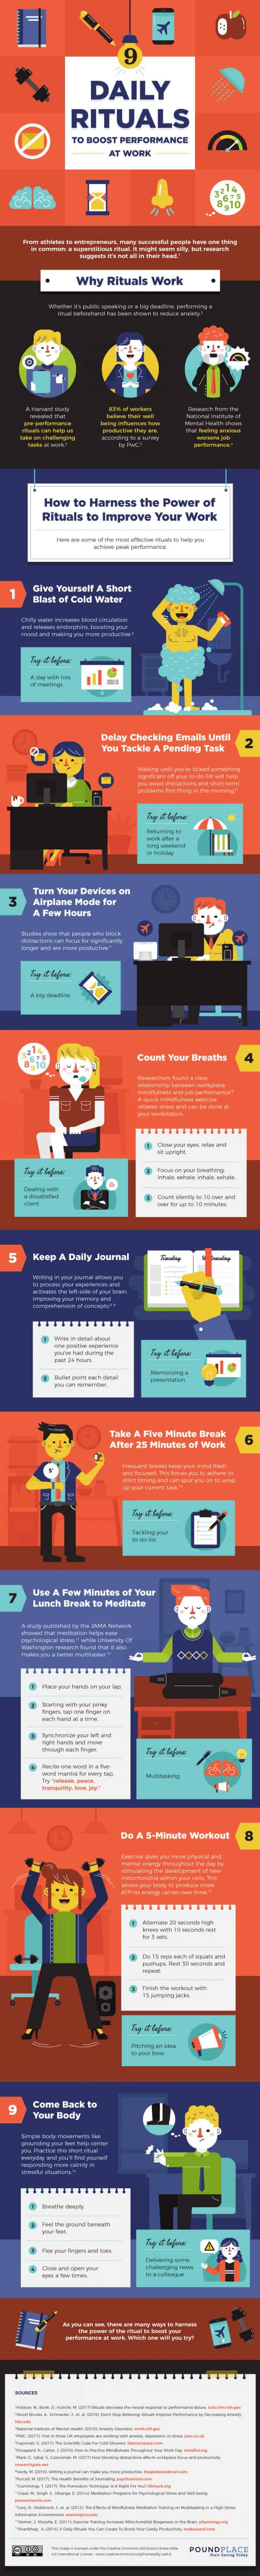 9 Daily Rituals To Boost Performance At Work